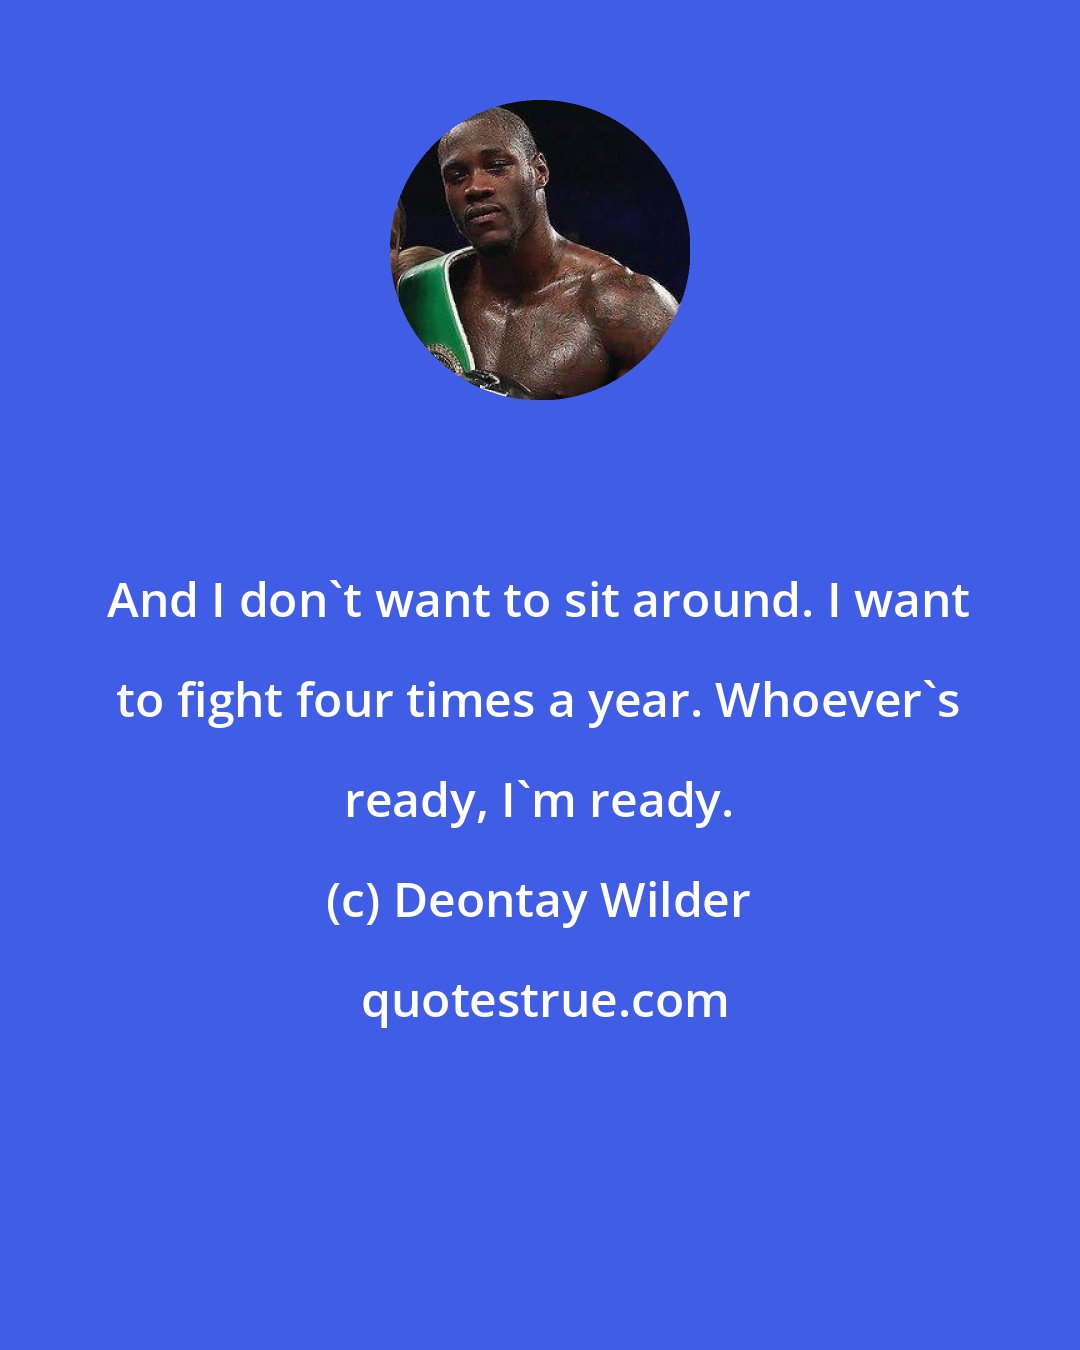 Deontay Wilder: And I don't want to sit around. I want to fight four times a year. Whoever's ready, I'm ready.